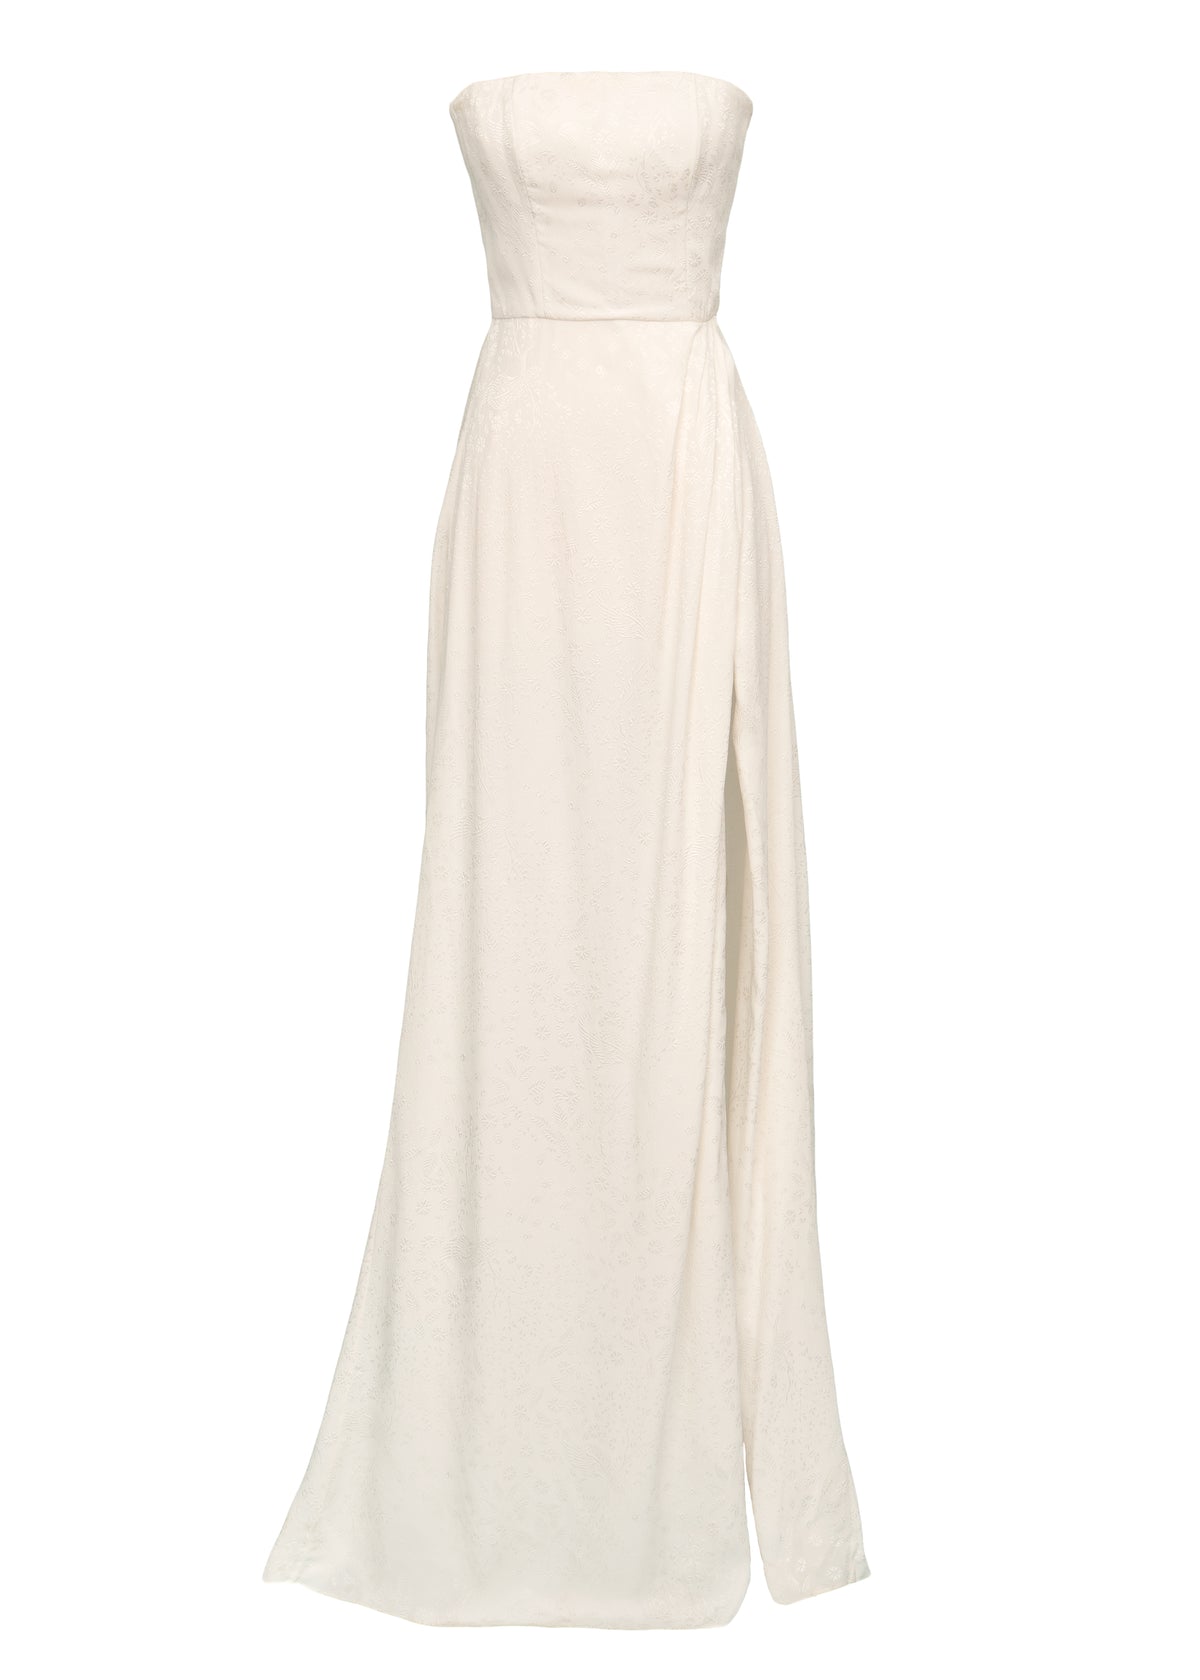 Bernini White Floral Jacquard Wrap Gown | Over The Moon